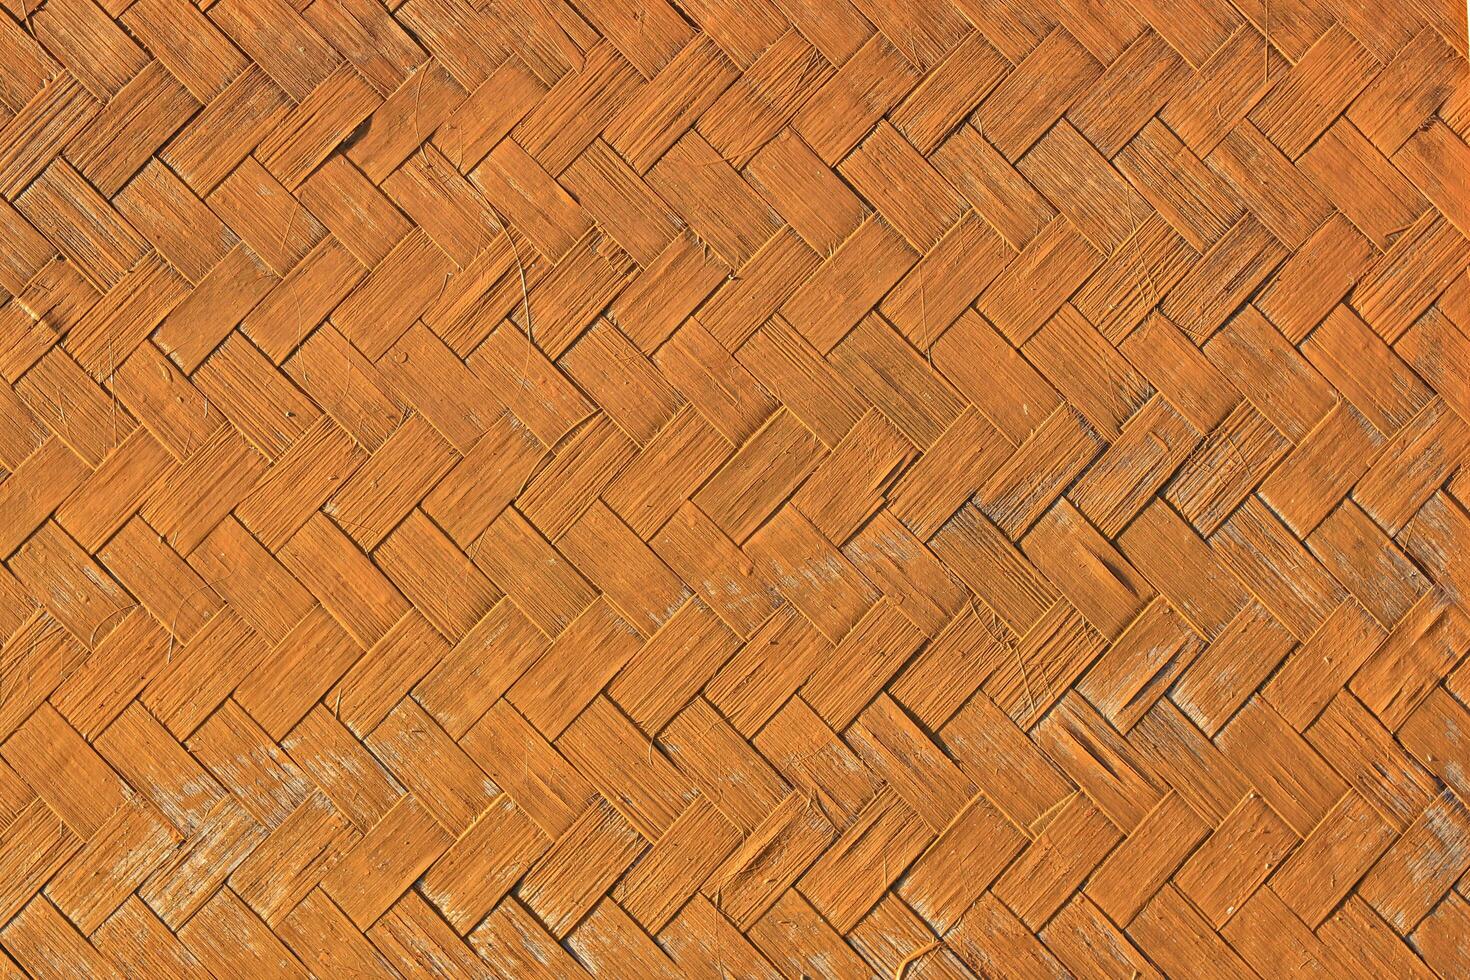 Background image of a house wall made of woven bamboo photo